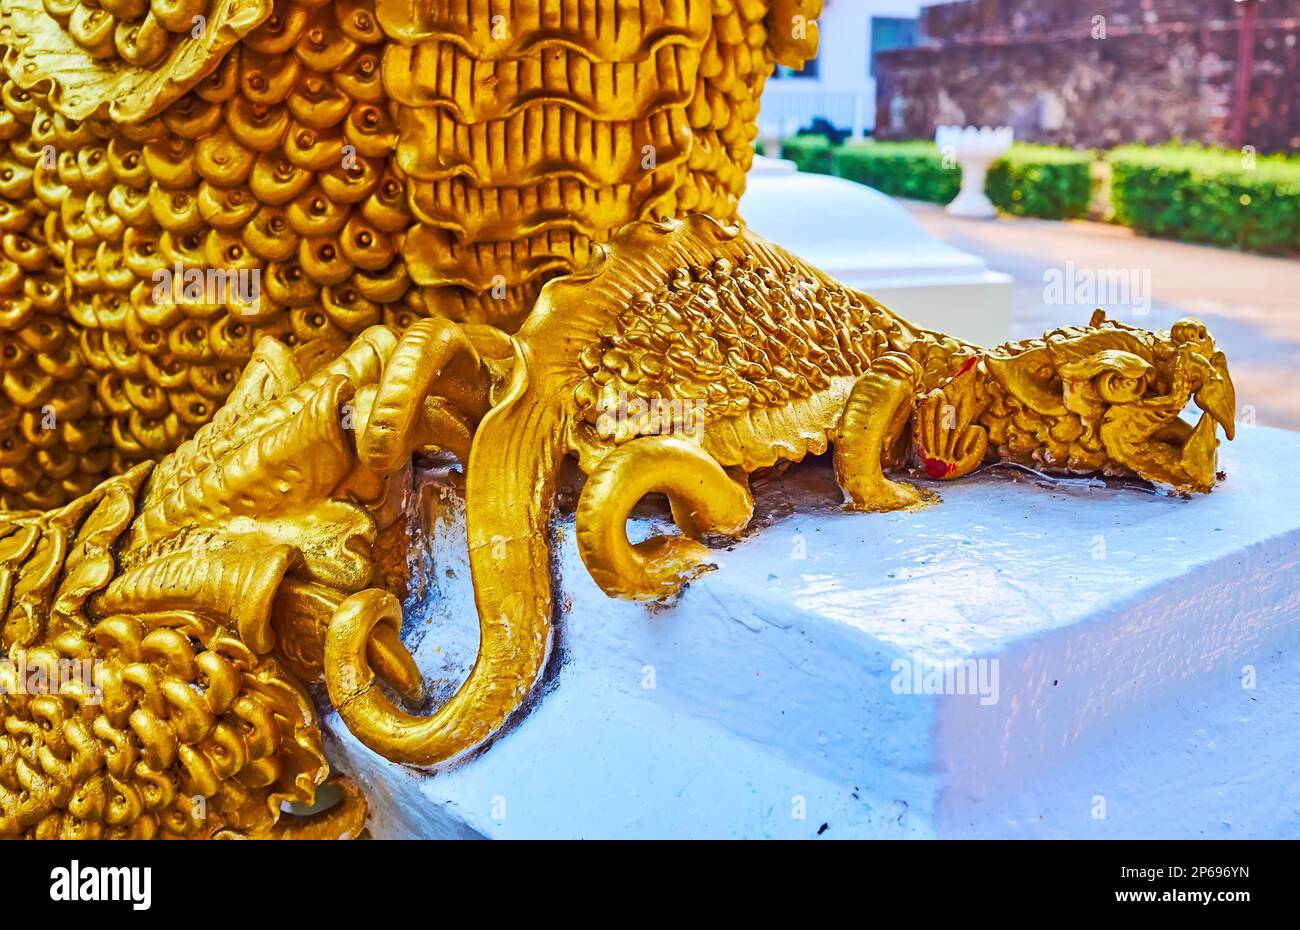 The tiny dragon-like sculpture of Mom mythic creature at the feet of bigger one, Wat Umong Mahathera Chan, Chiang Mai, Thailand Stock Photo